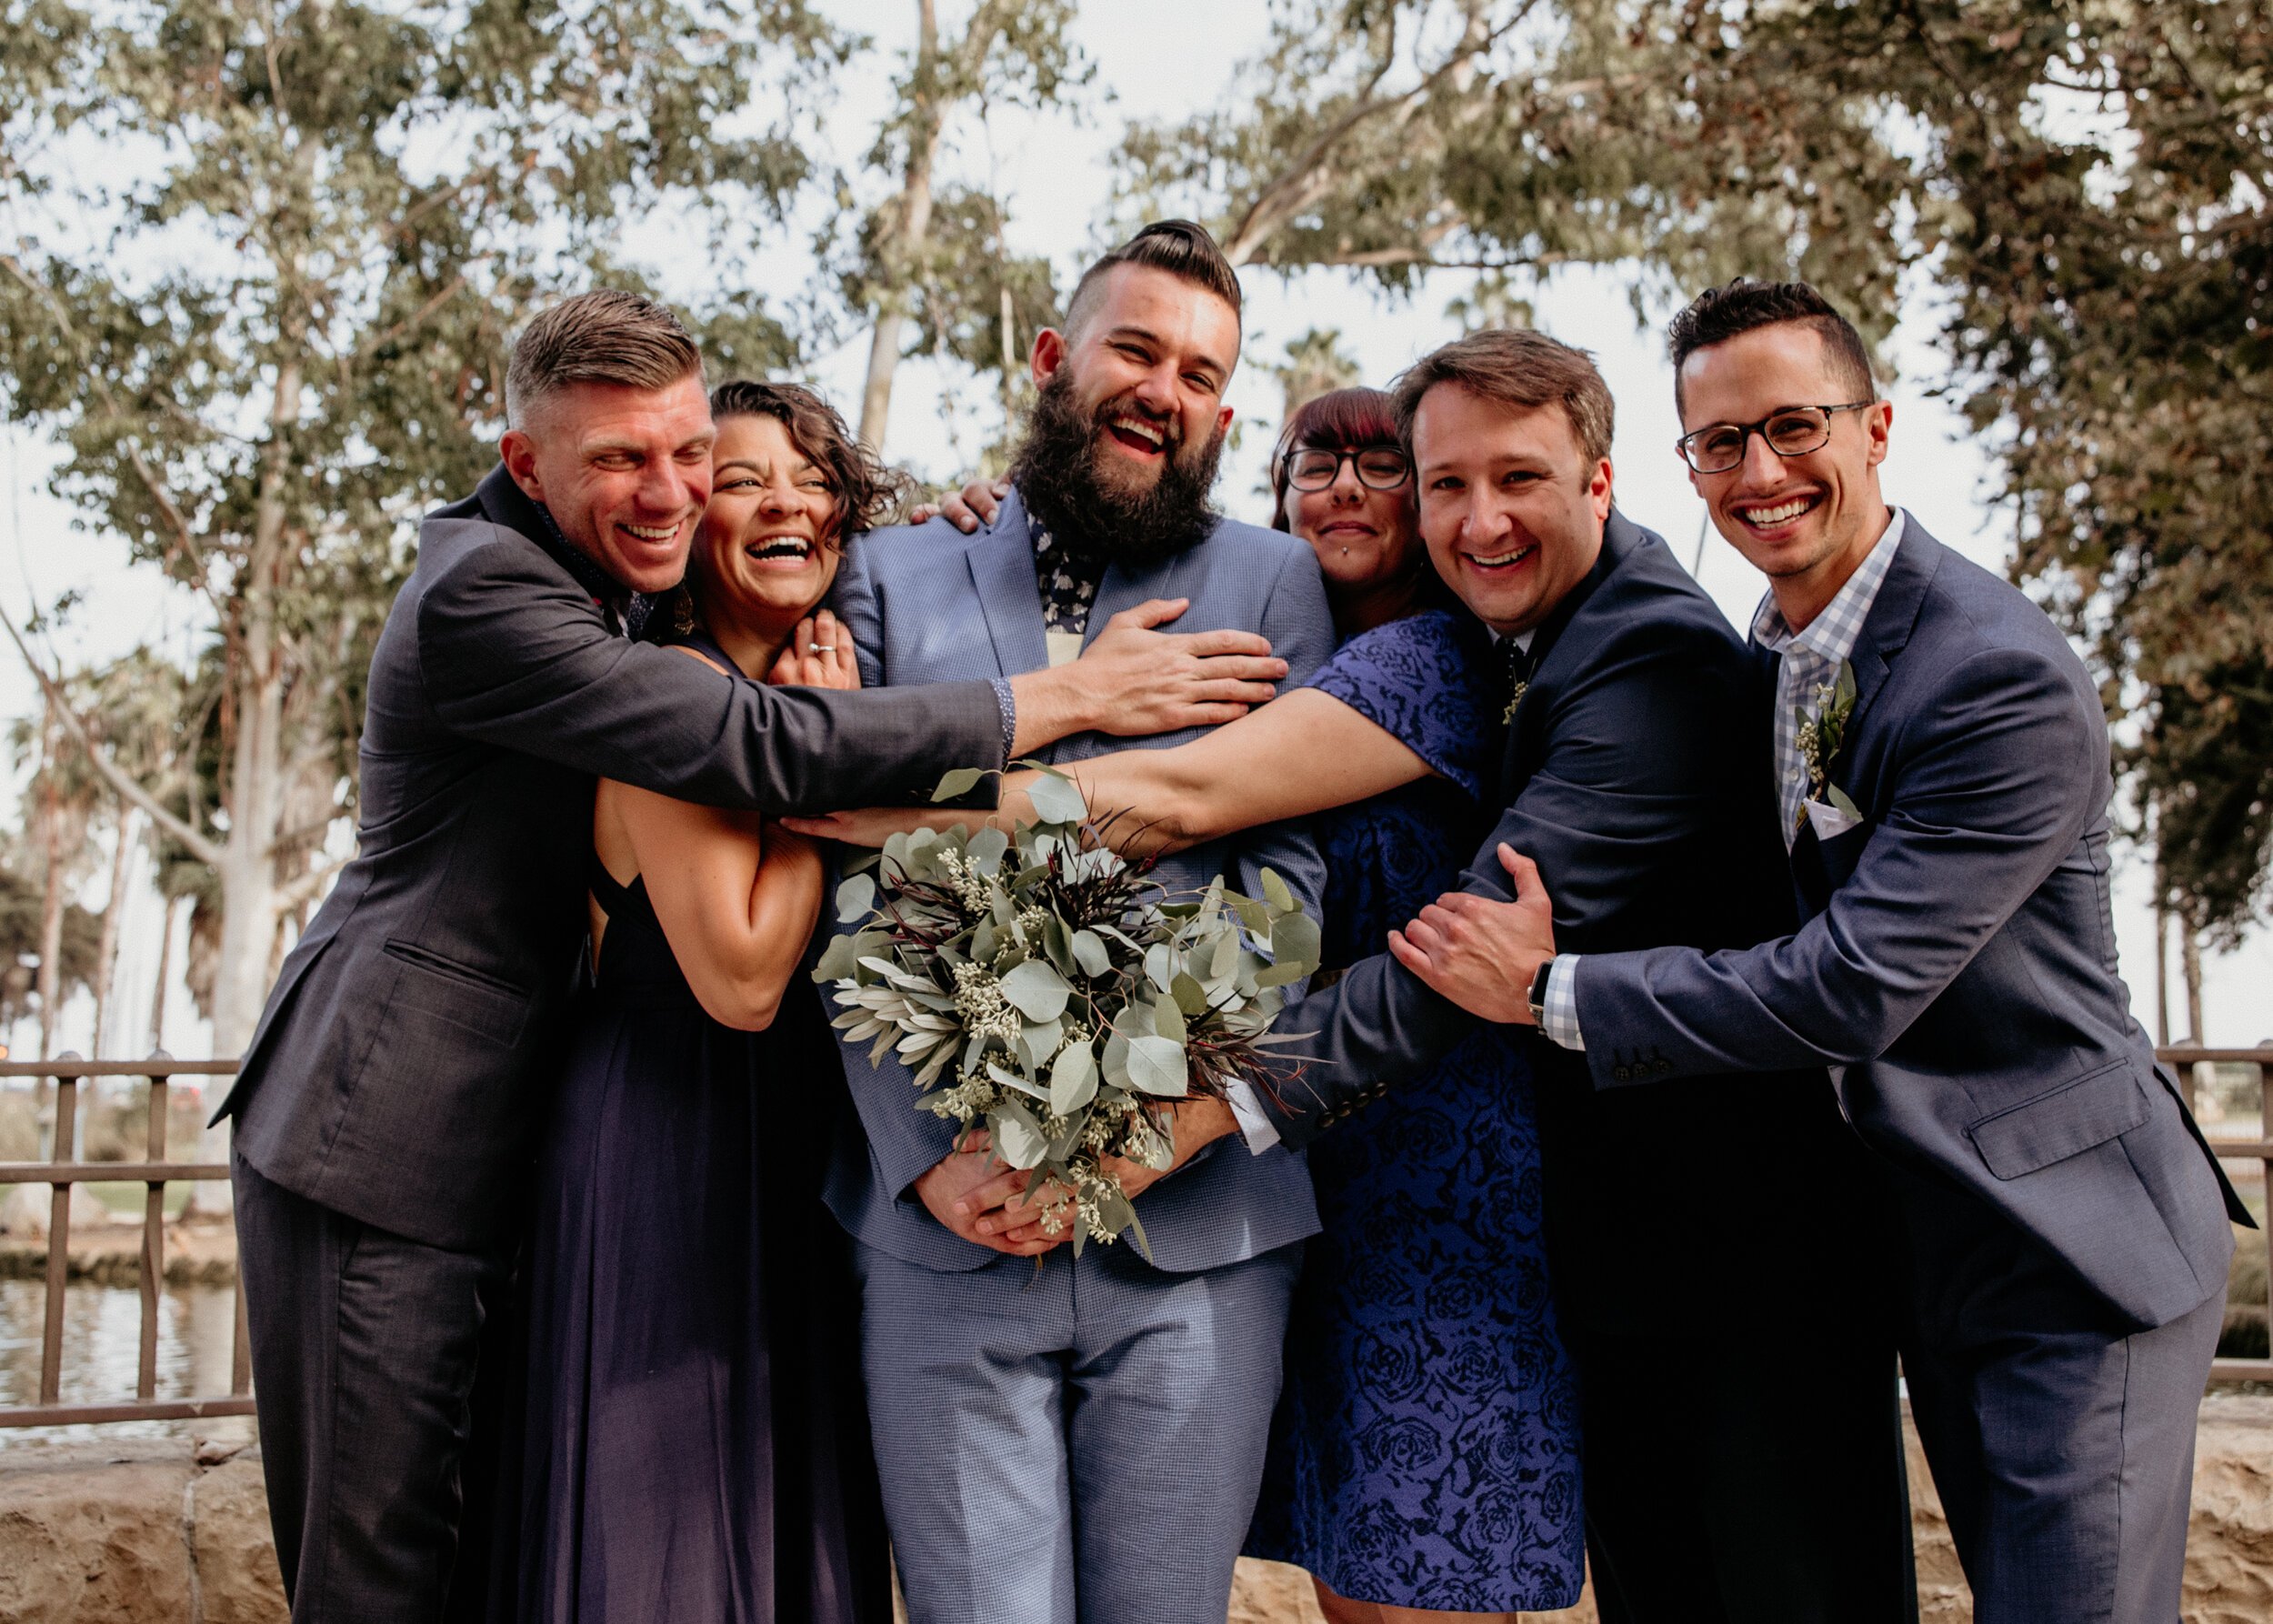 www.santabarbarawedding.com | Carousel House | AE Photography | Rancho Santa Cecilia | Groom with Bouquet Surrounded by Friends